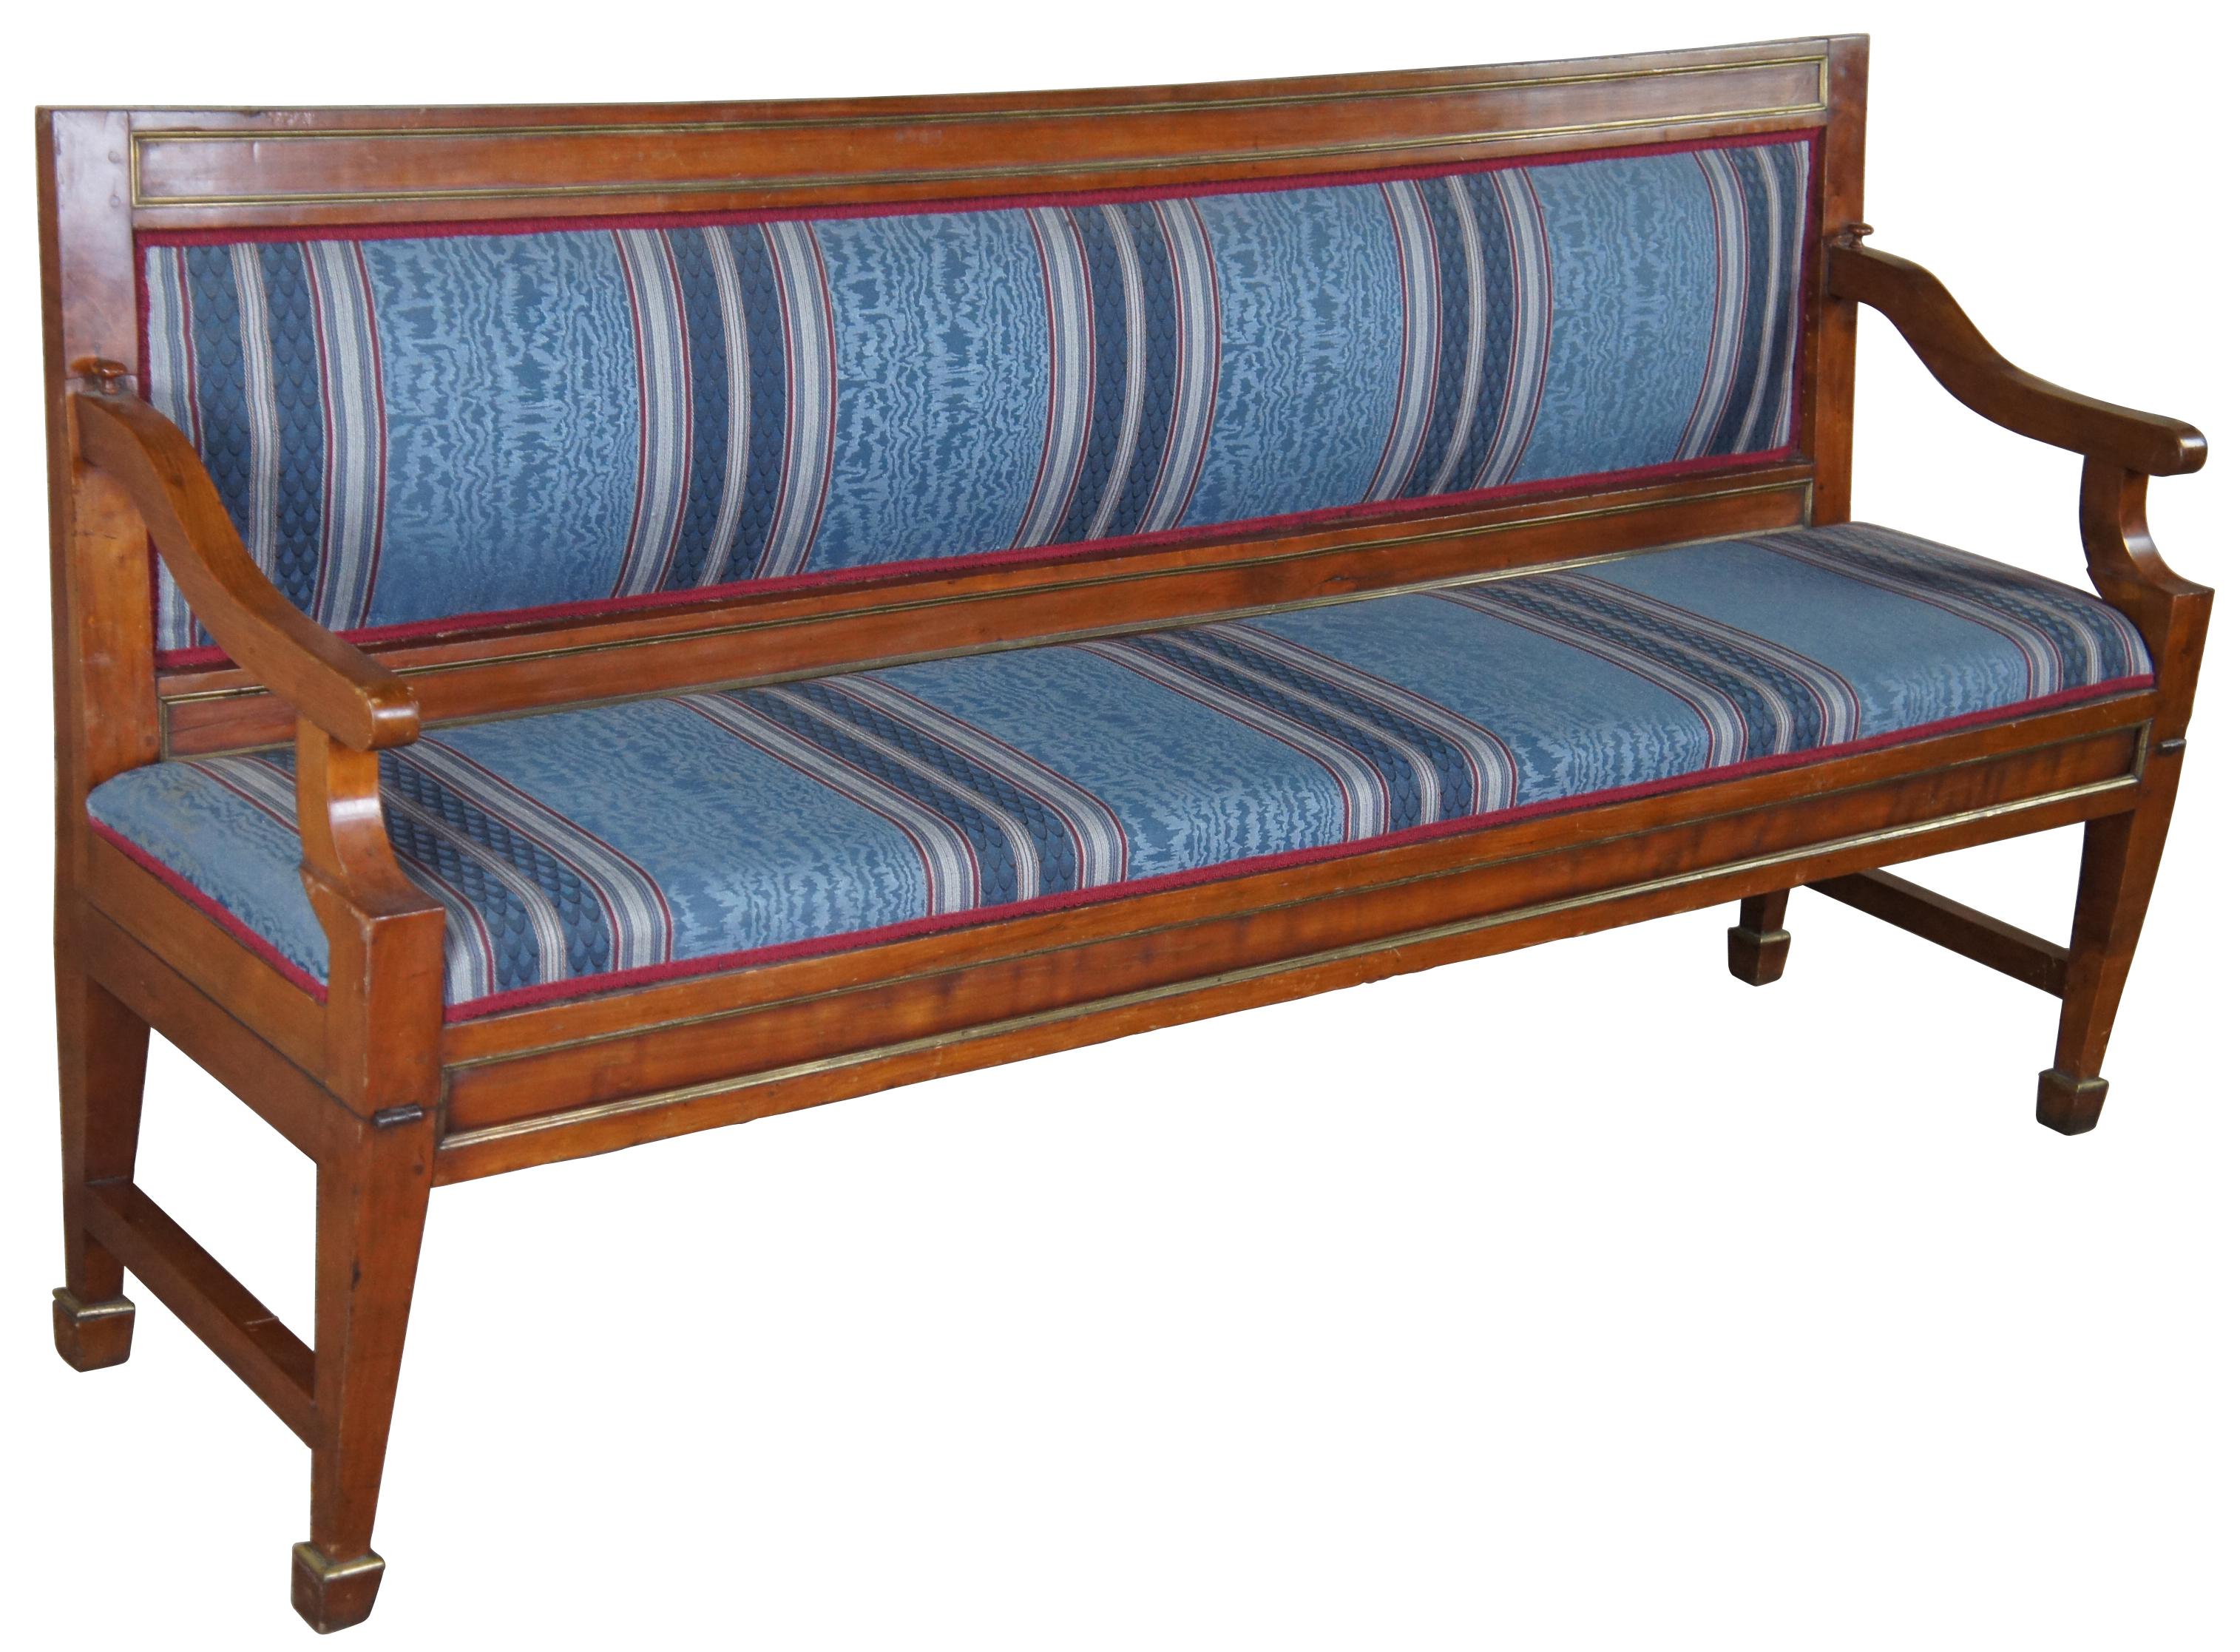 Early 19th century museum quality English Regency convertible hall bench or bed. A rectangular form made from walnut with with brass trim. Upholstered in a striped blue and red fabric with red cording. The bench is supported by square tapered legs